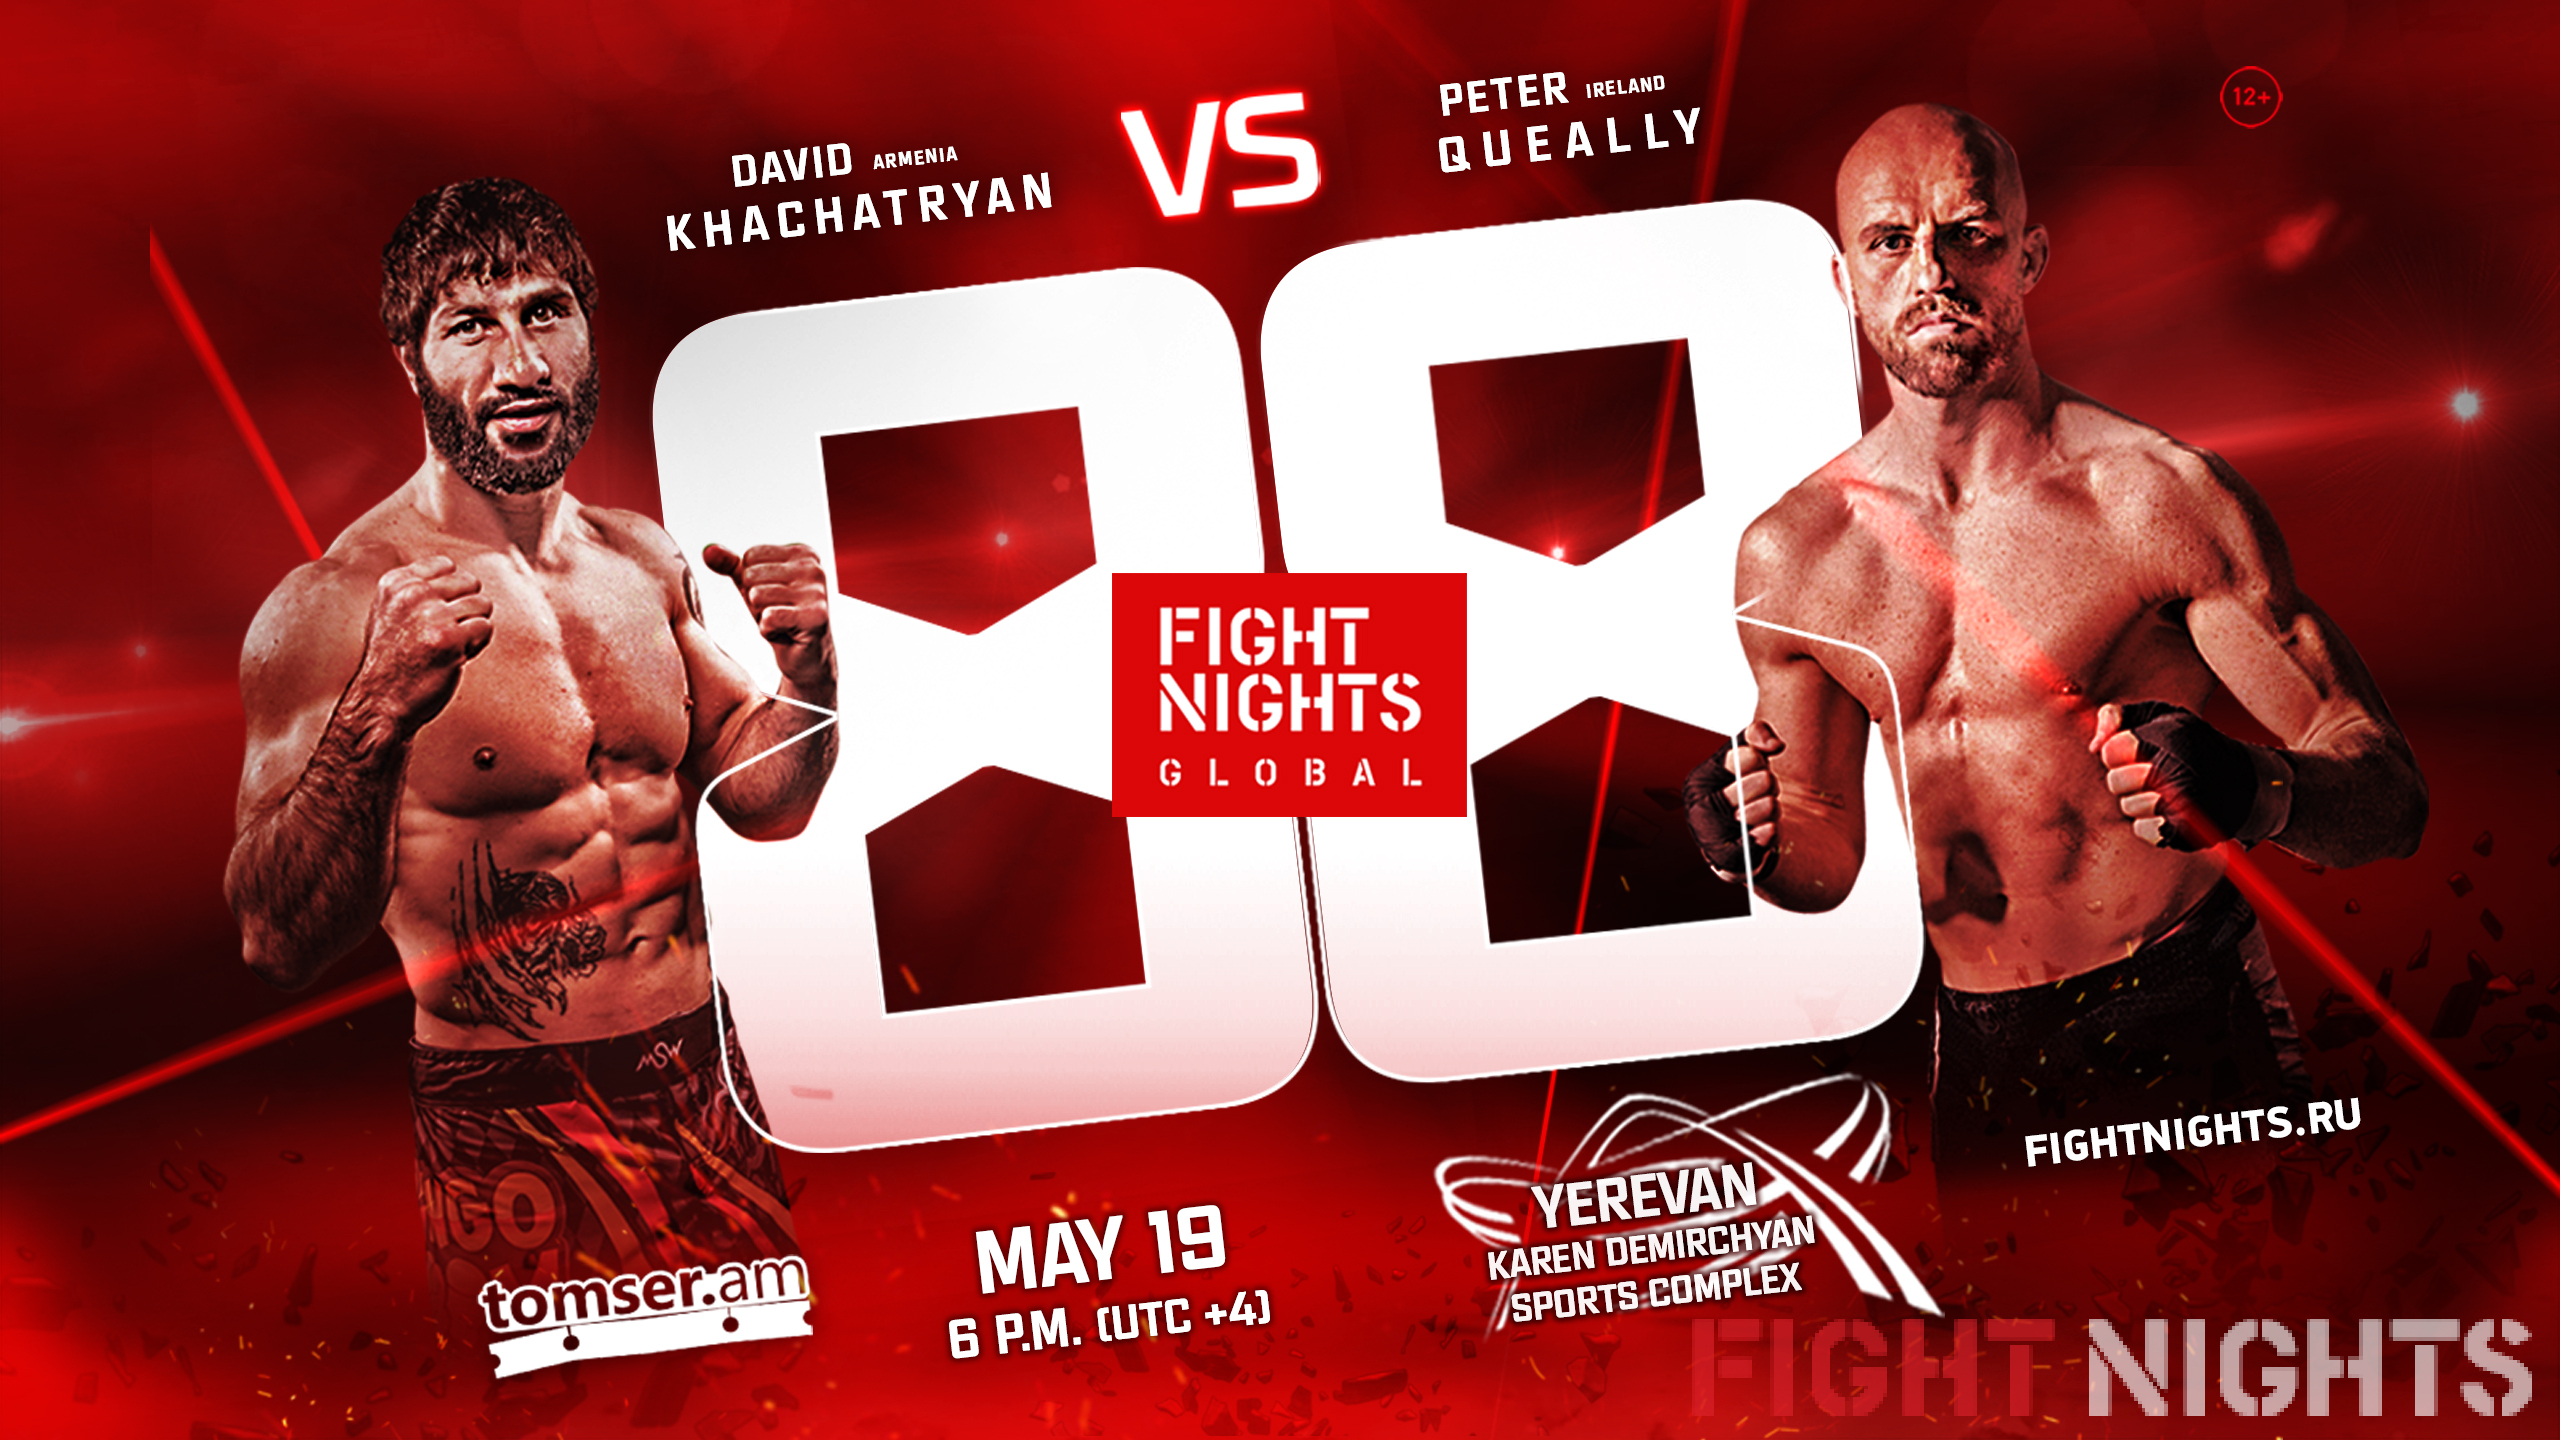 It's official! May 19. Yerevan. FIGHT NIGHTS GLOBAL 88.